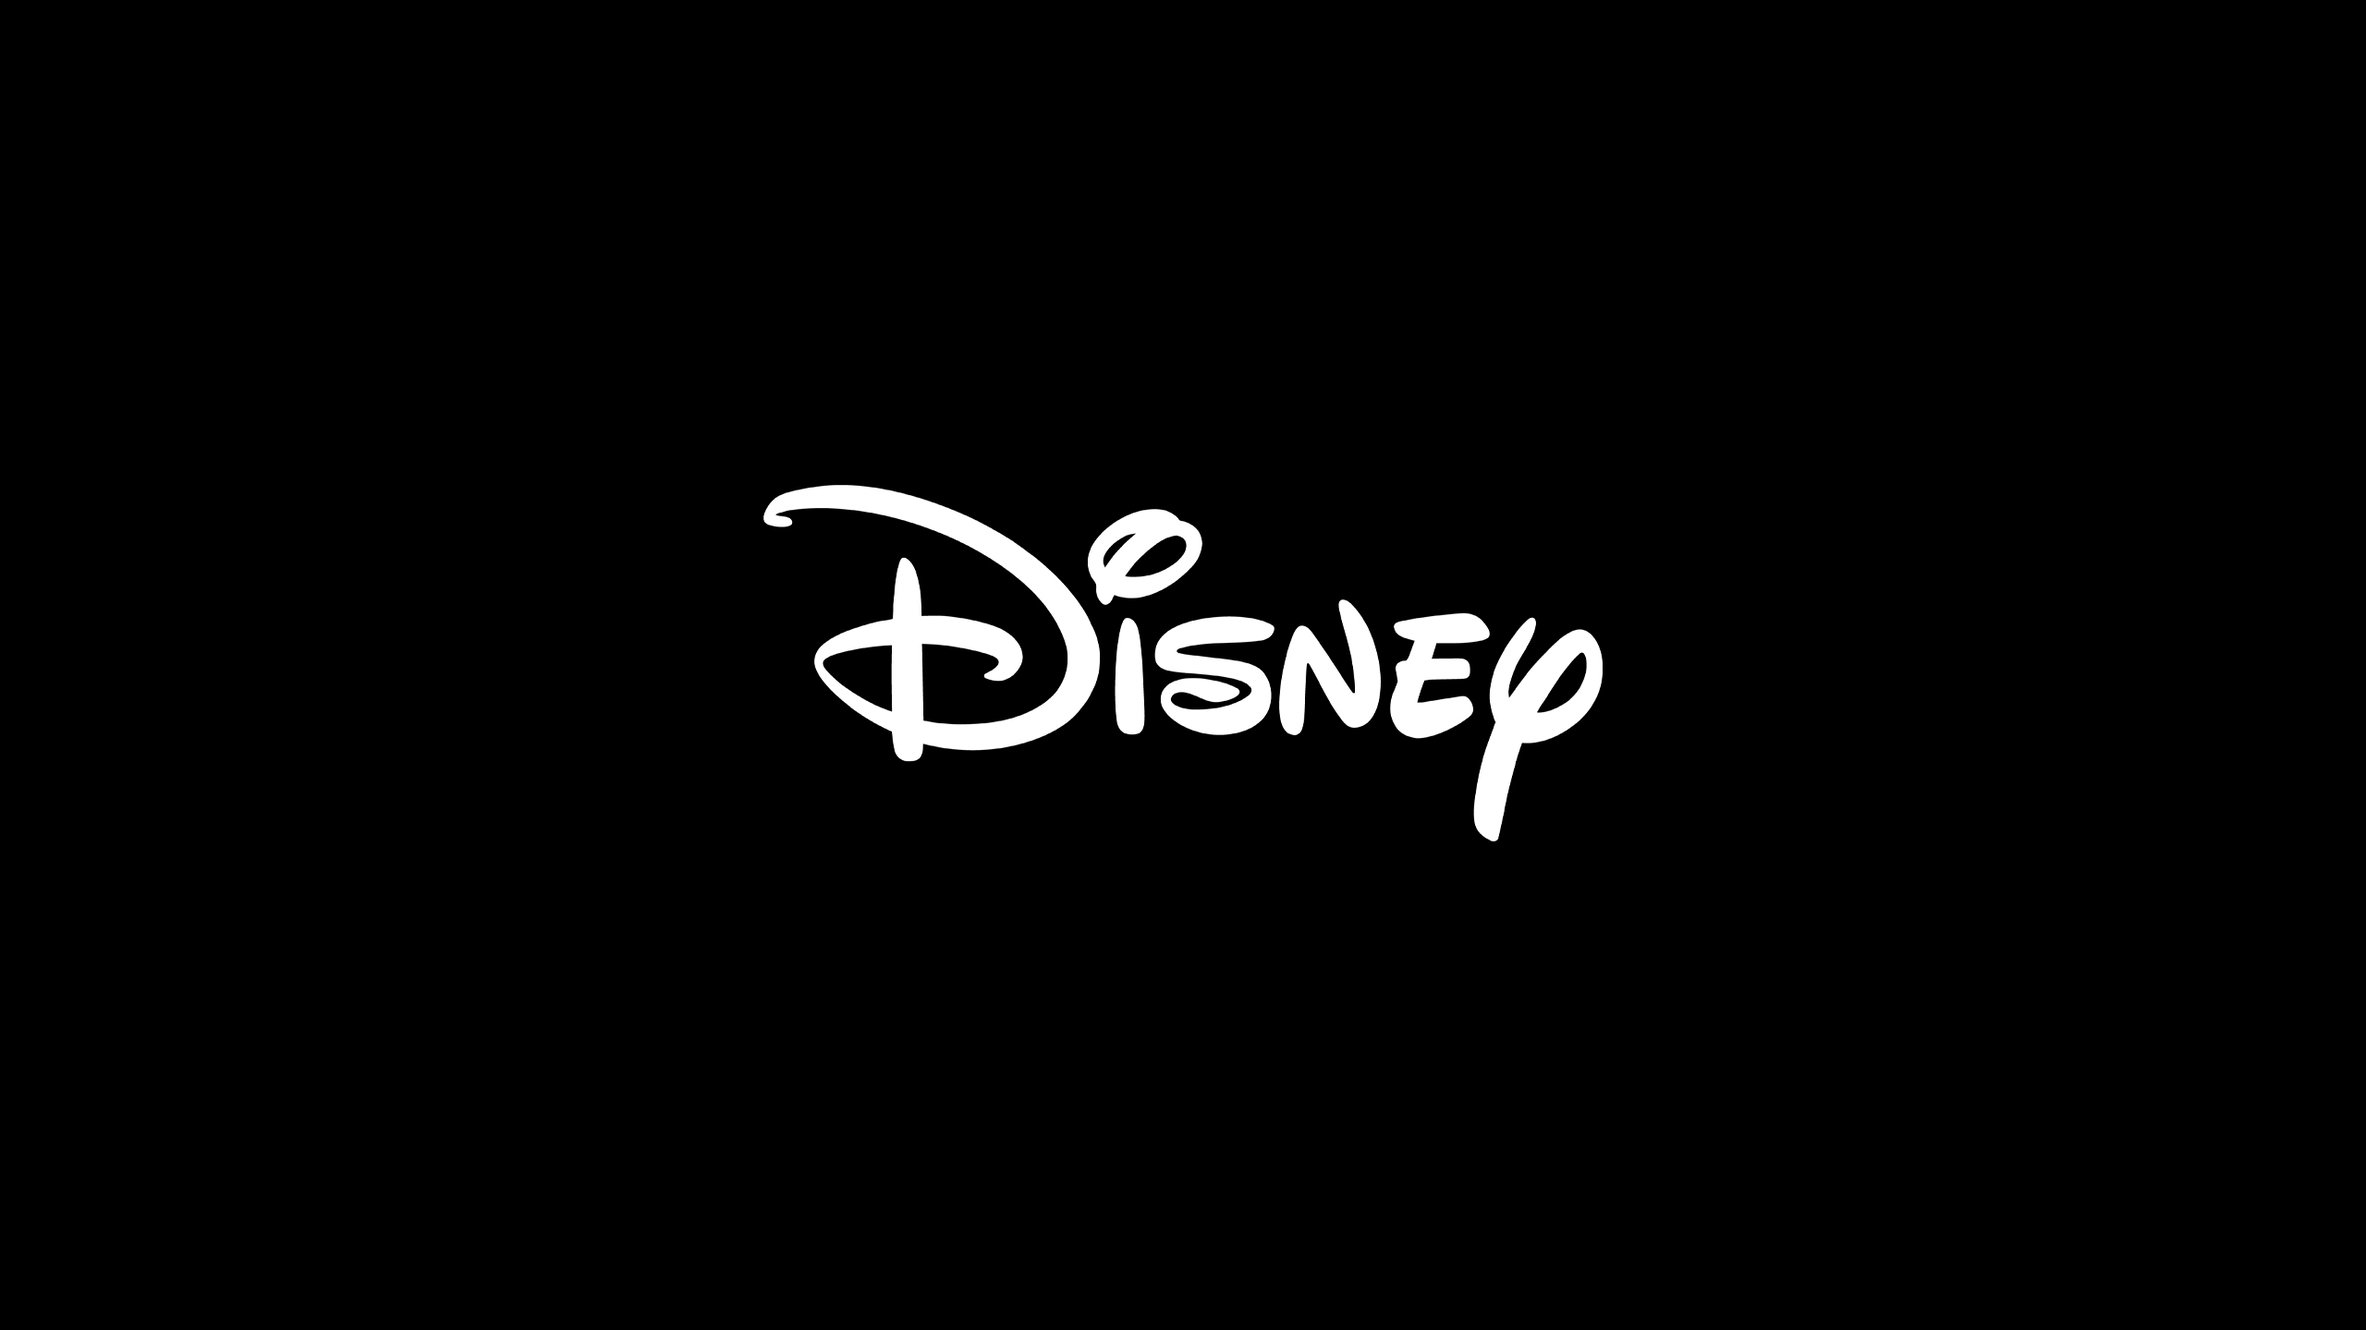 BRAND NEW FX/Disney SERIES Looking for Blonde Females, model types